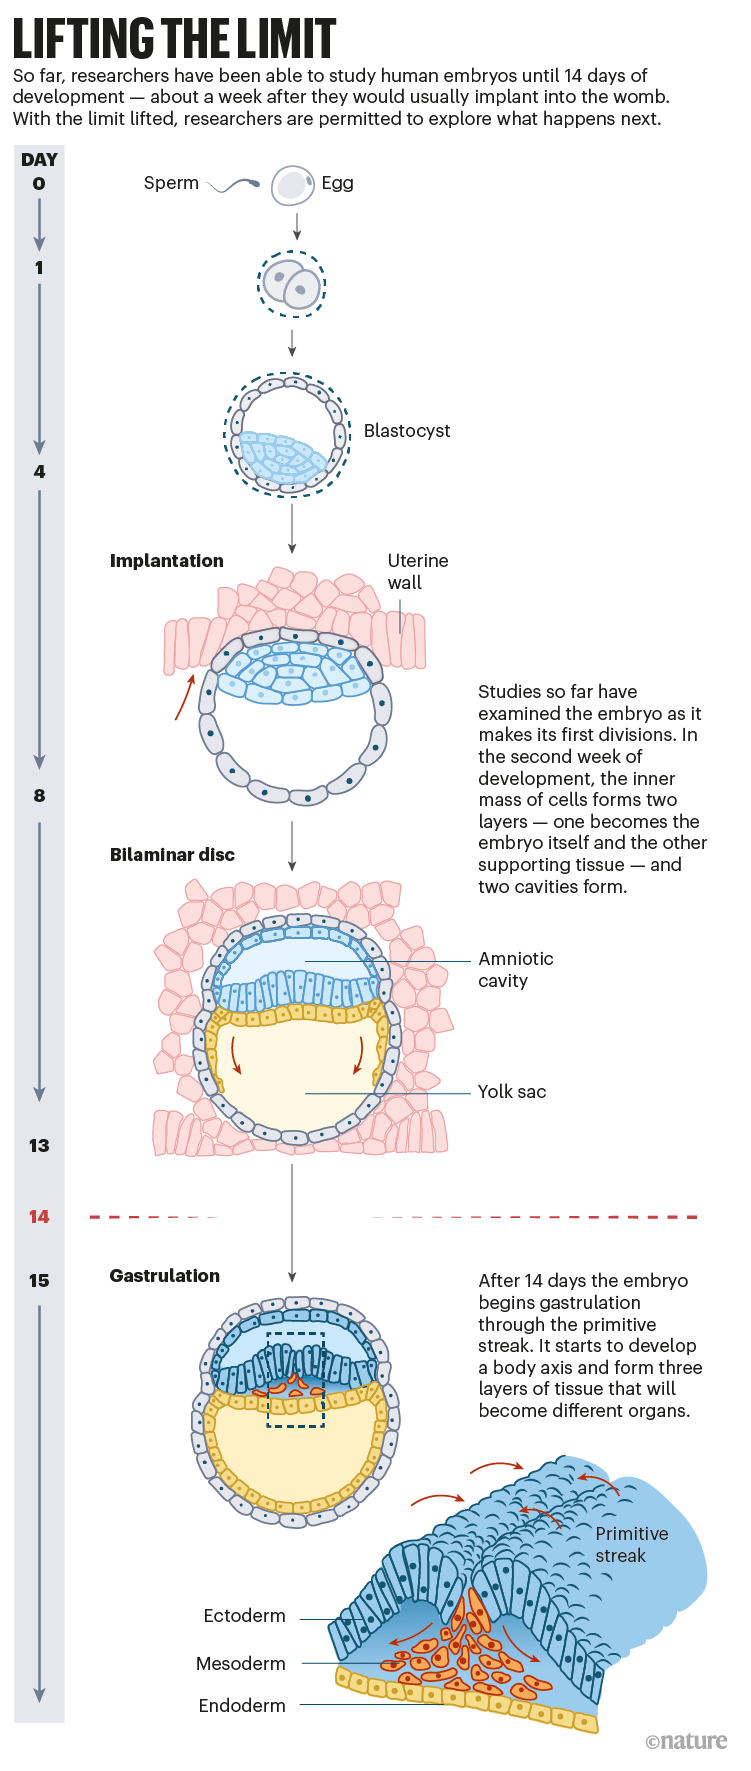 Lifting the limit: an infographic that shows the early stages of human embryo development and what can be studied after 14 days.